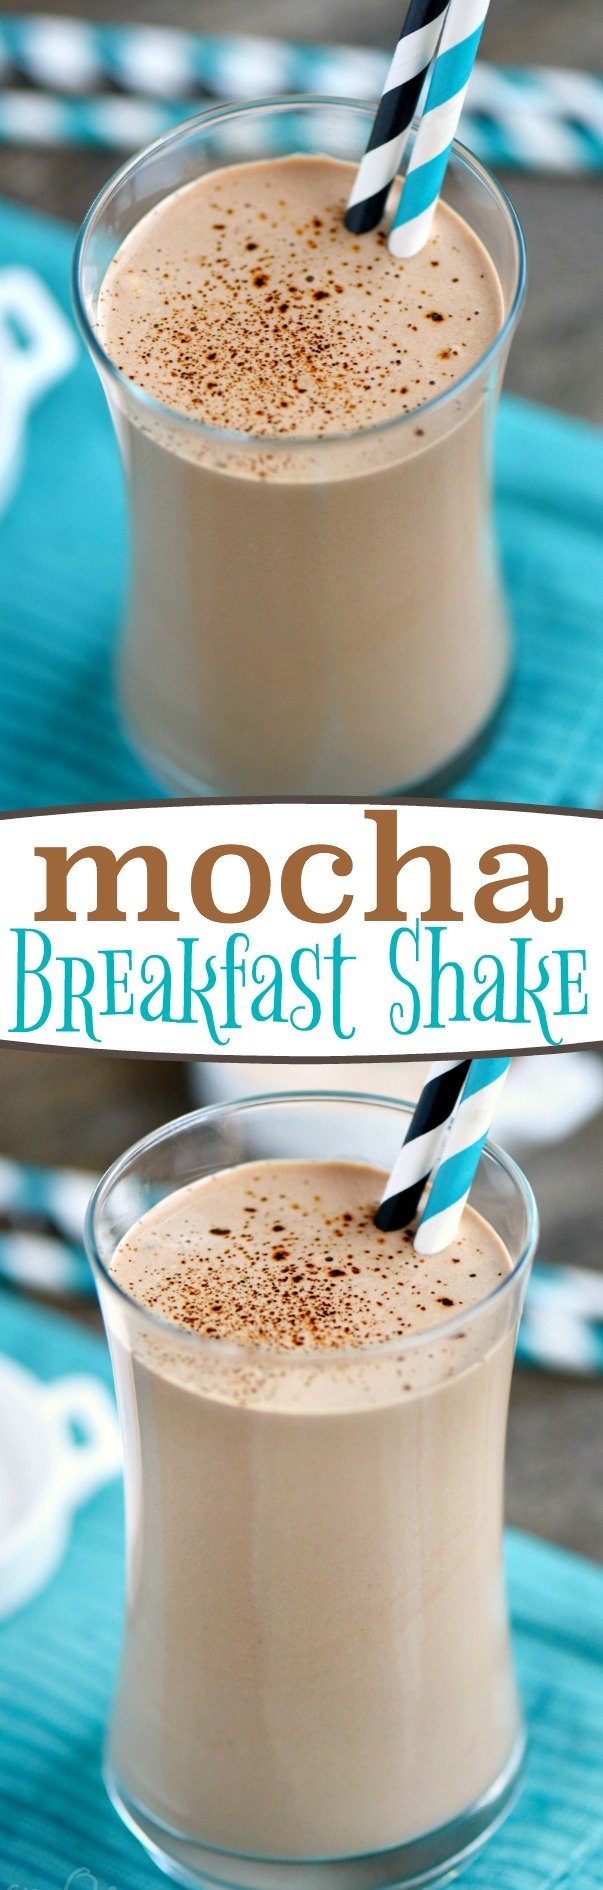 This delicious Mocha Breakfast Shake is made with Greek yogurt for a wake-me-up, protein-packed breakfast! For those mornings when only coffee AND chocolate will do! // Mom On Timeout